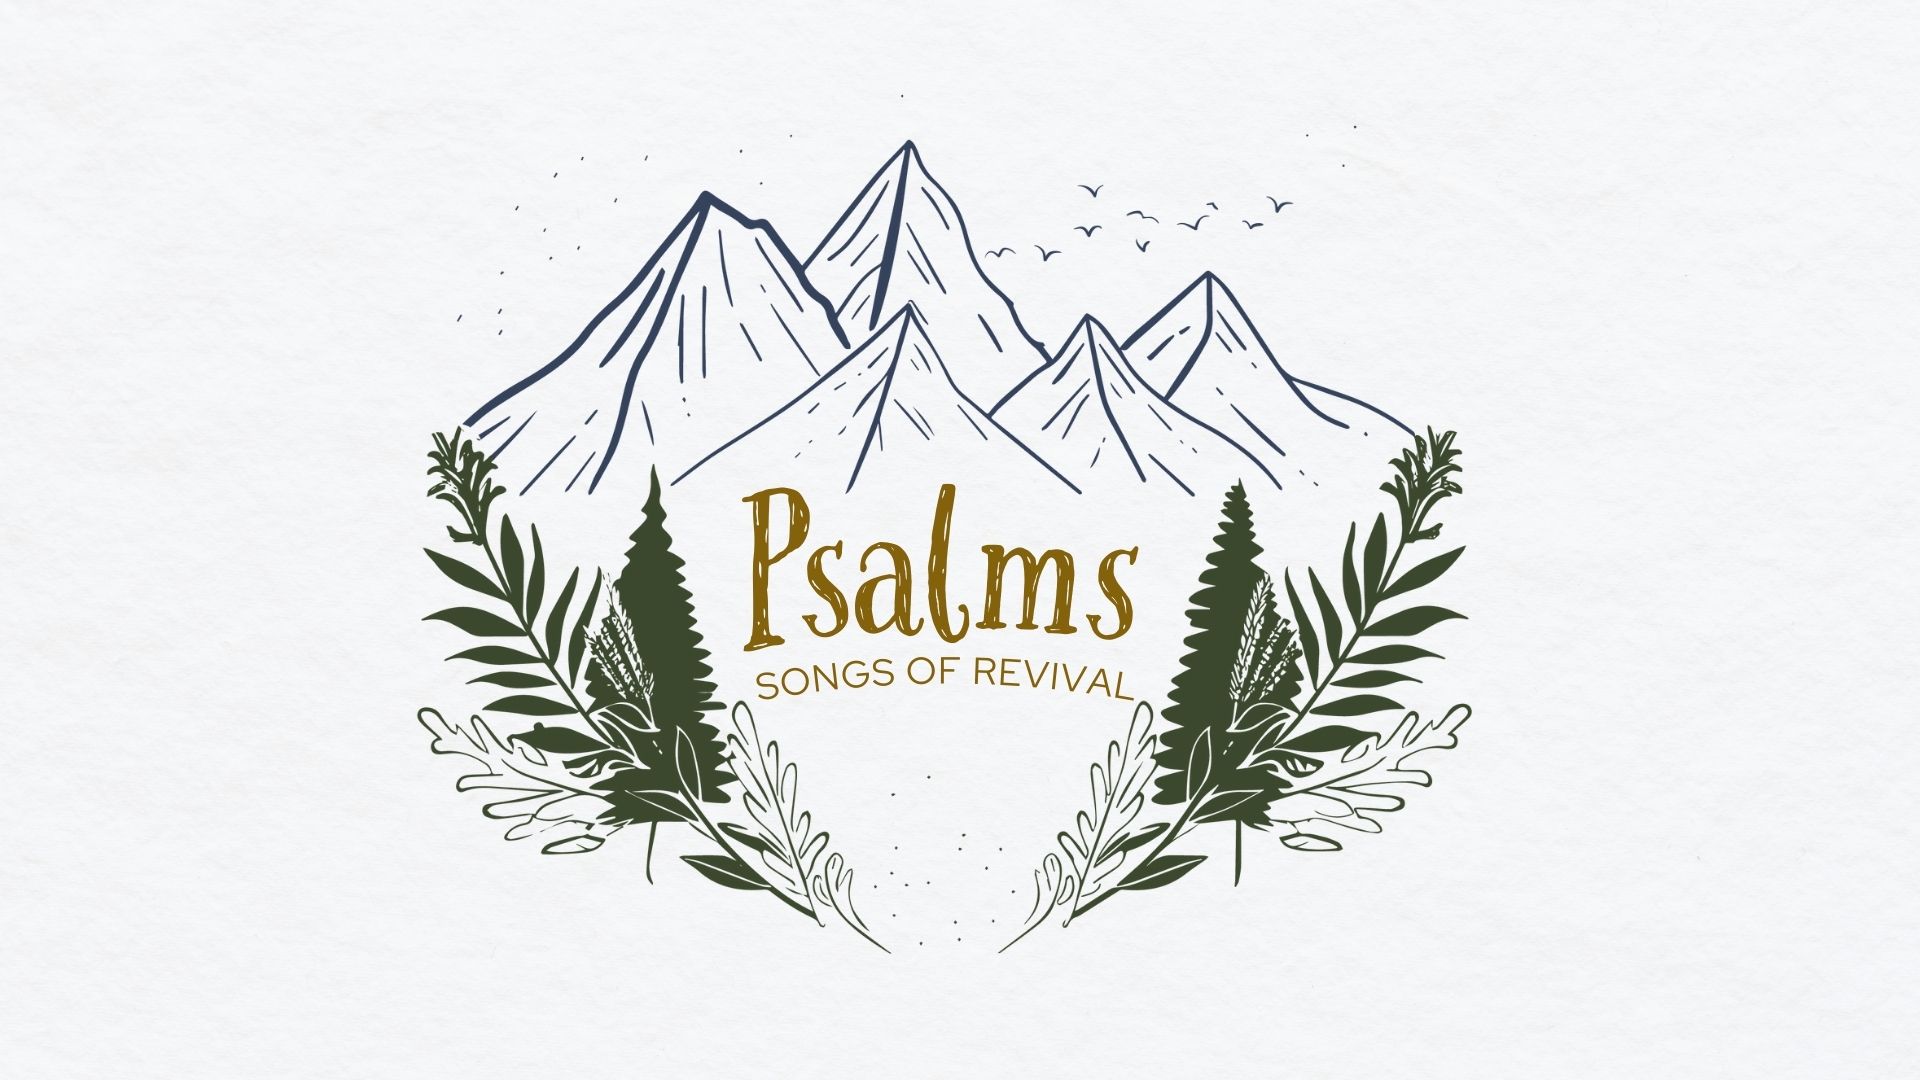 Psalms for the Summer - Songs of Revival